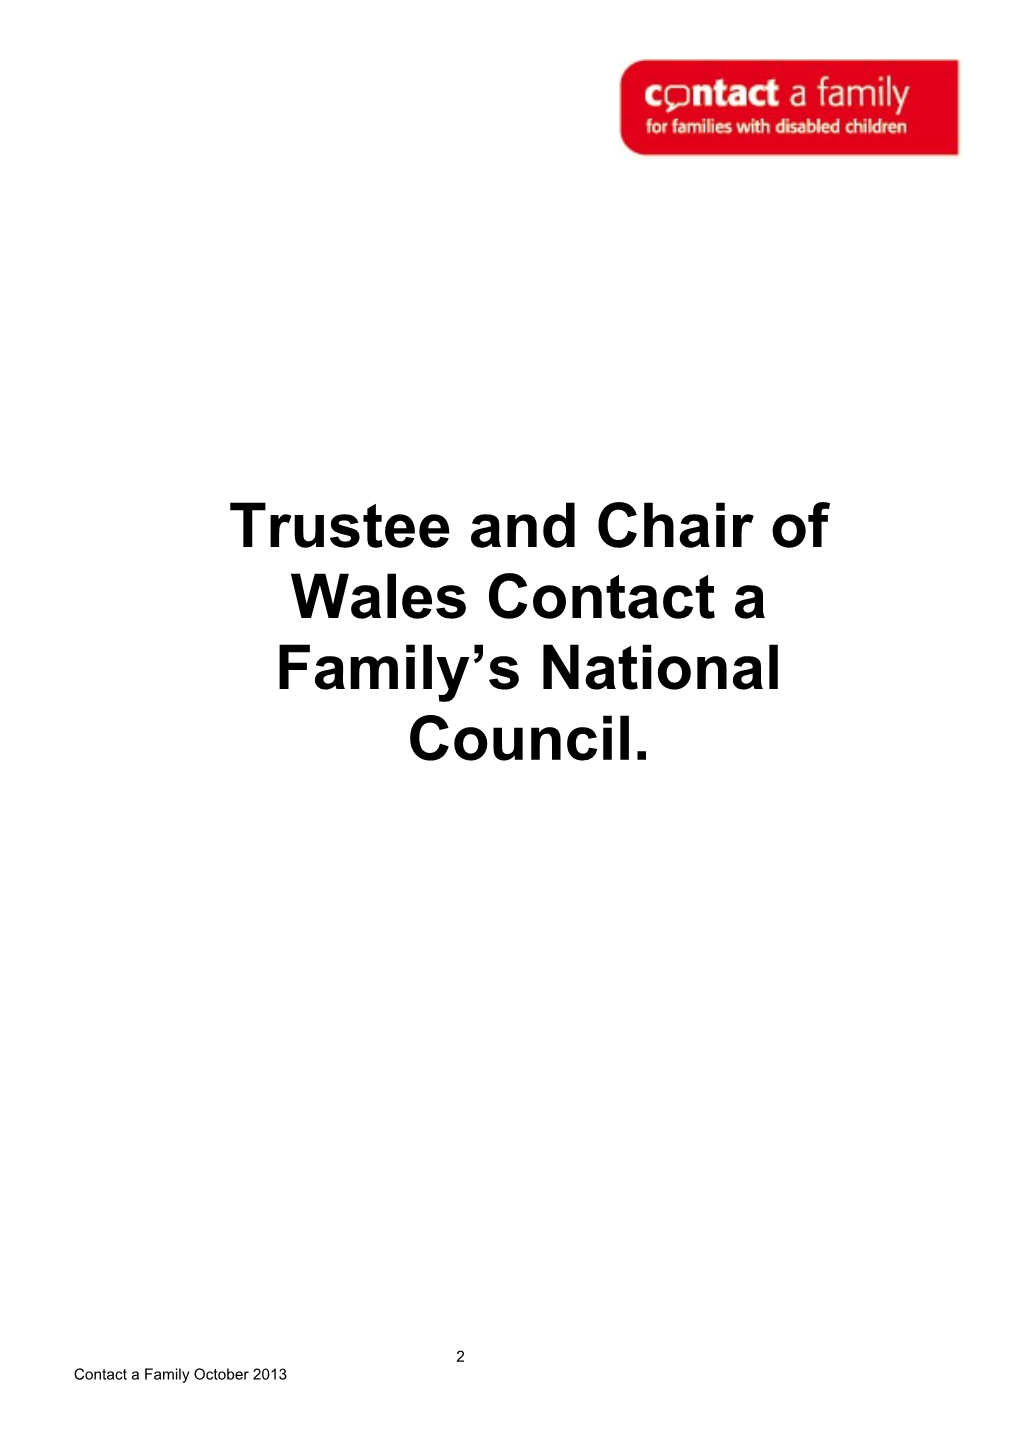 Contact a Family Is Recruiting a Trustee and Chair of National Council